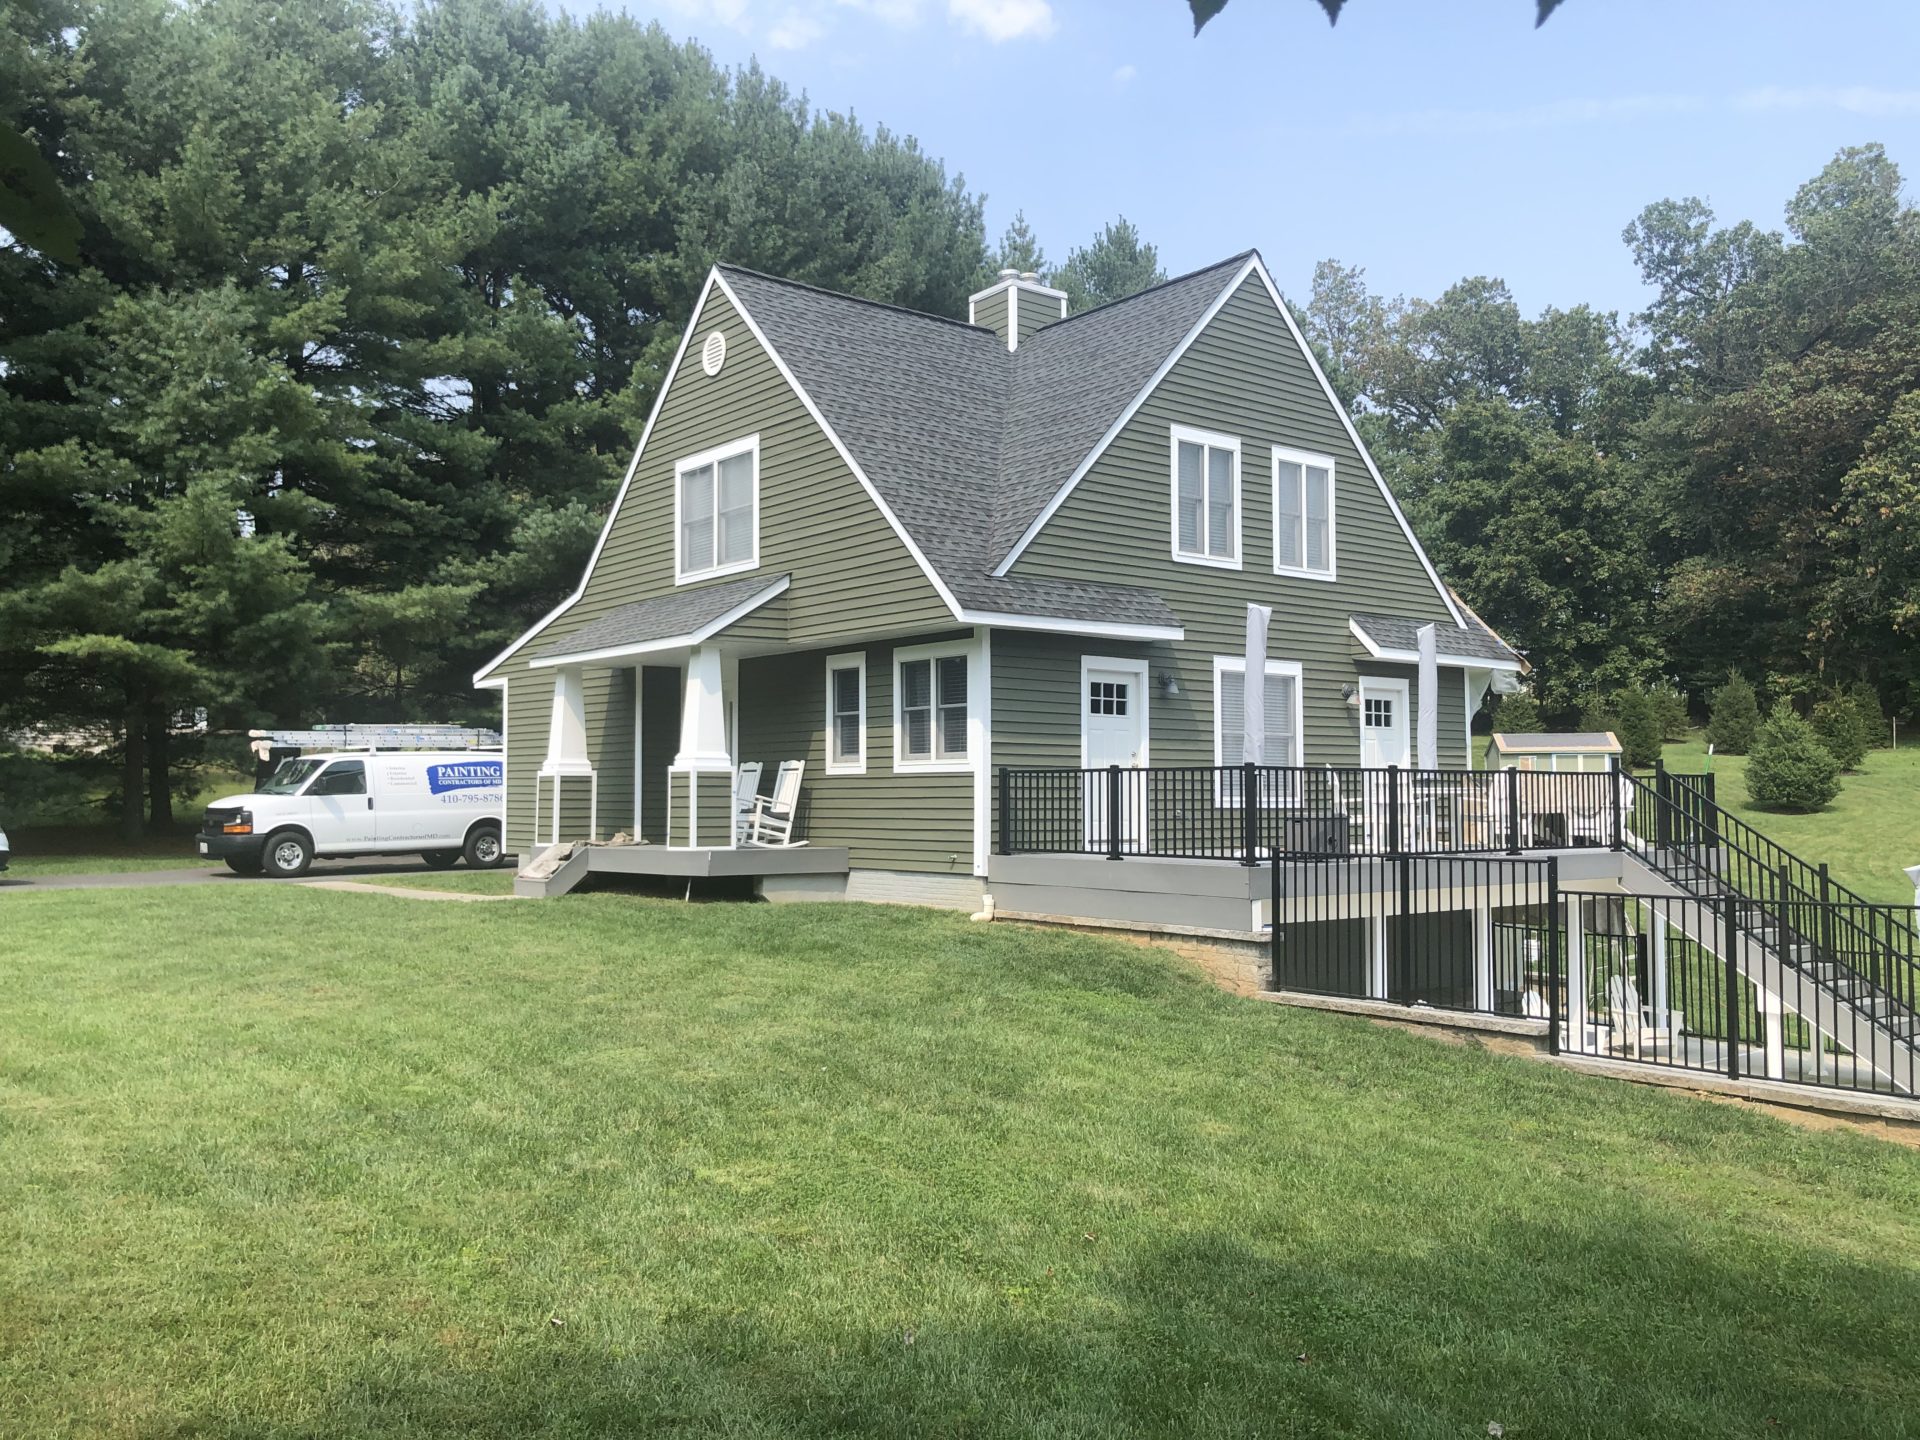 Home in Finksburg, MD with Sherwin Williams 3050 Greenbriar exterior paint